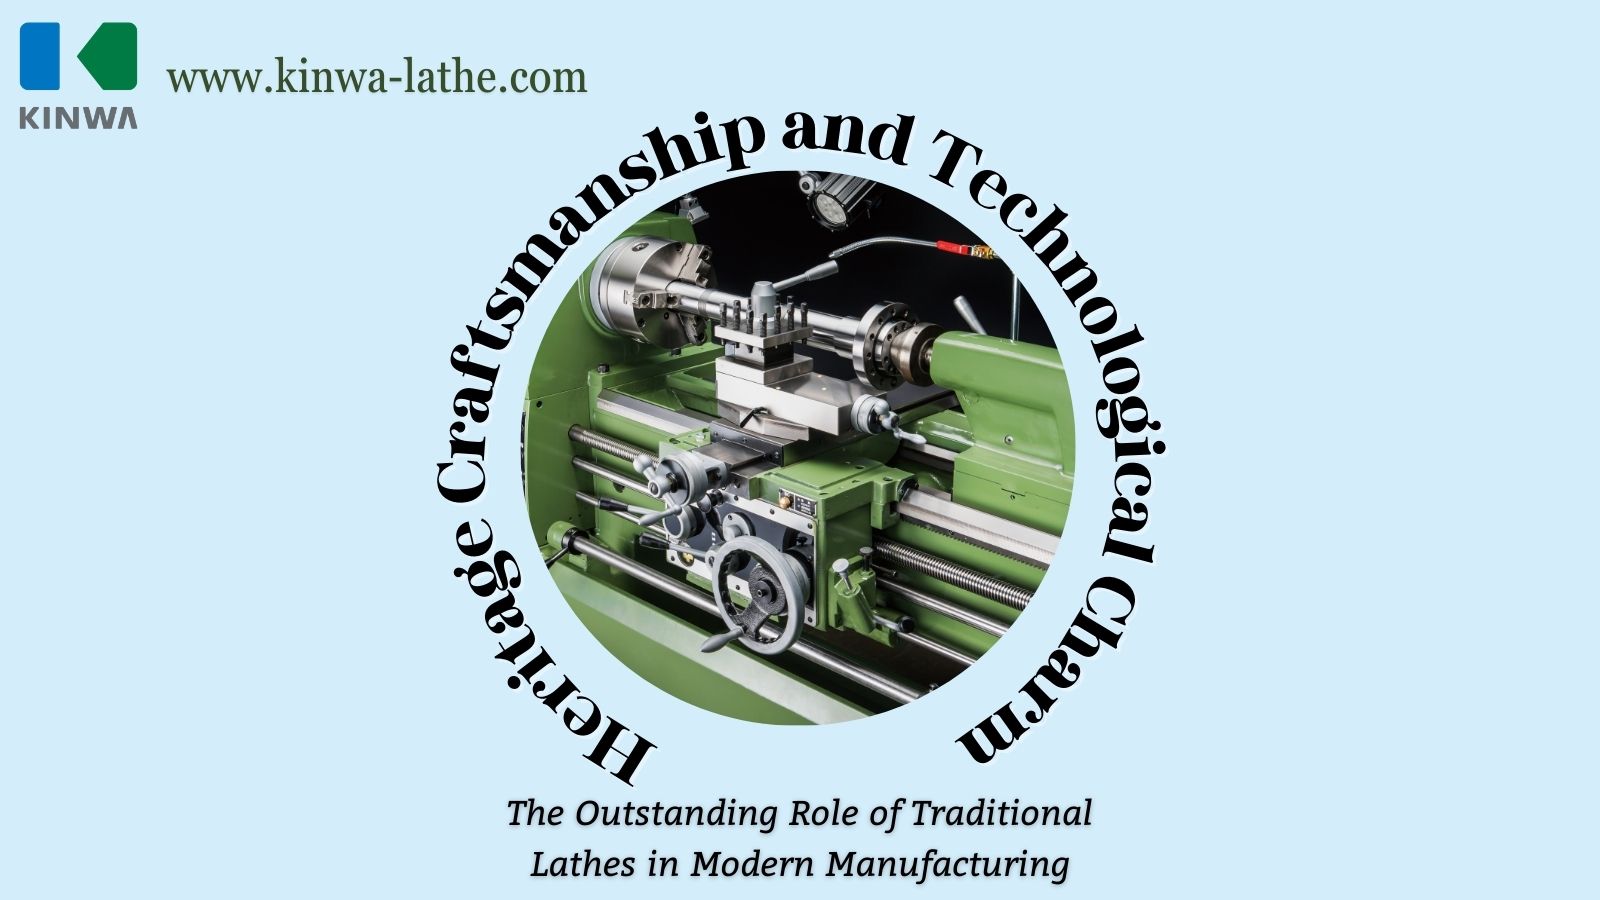 The Outstanding Role of Traditional Lathes in Modern Manufacturing